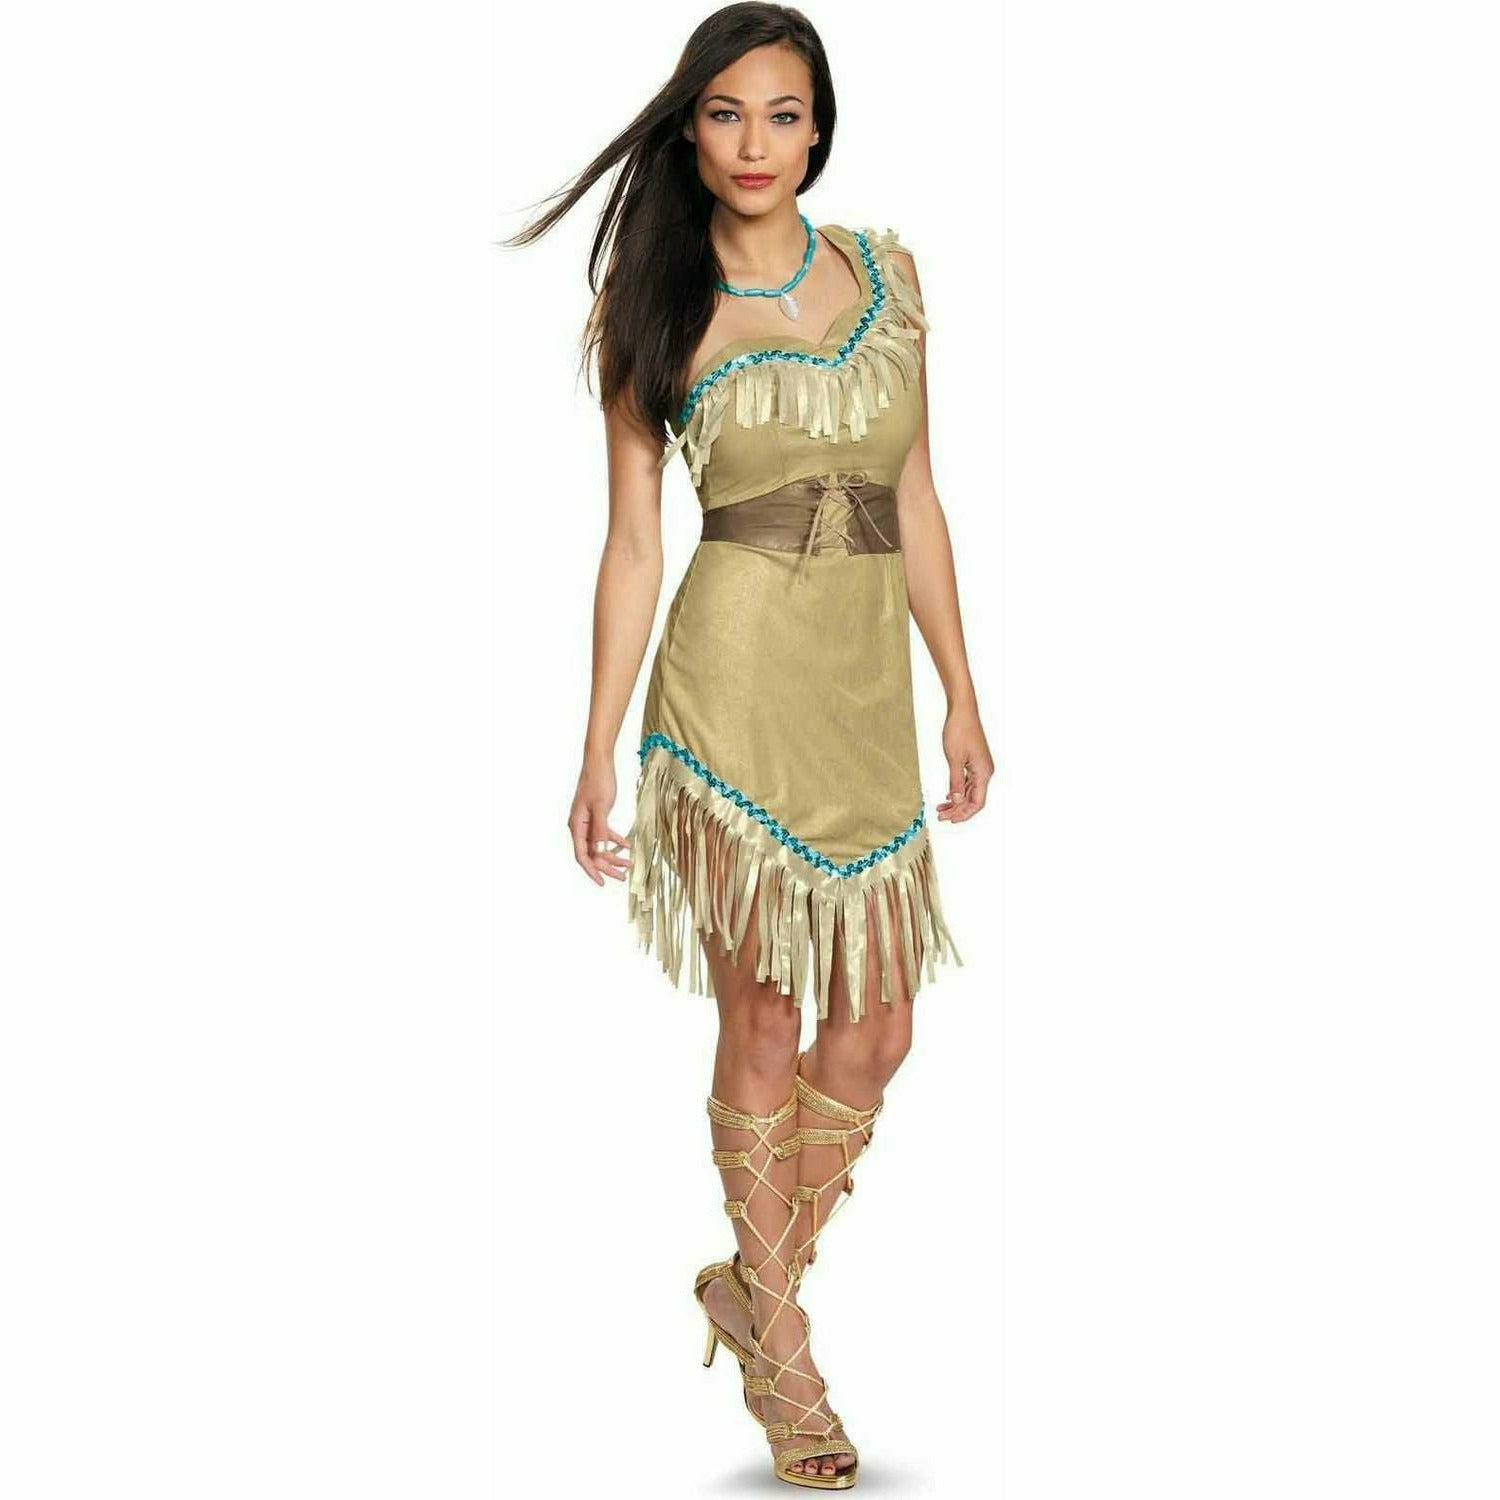 Disguise COSTUMES Adult Small Adult Disney Princess Pocahontas Deluxe Costume